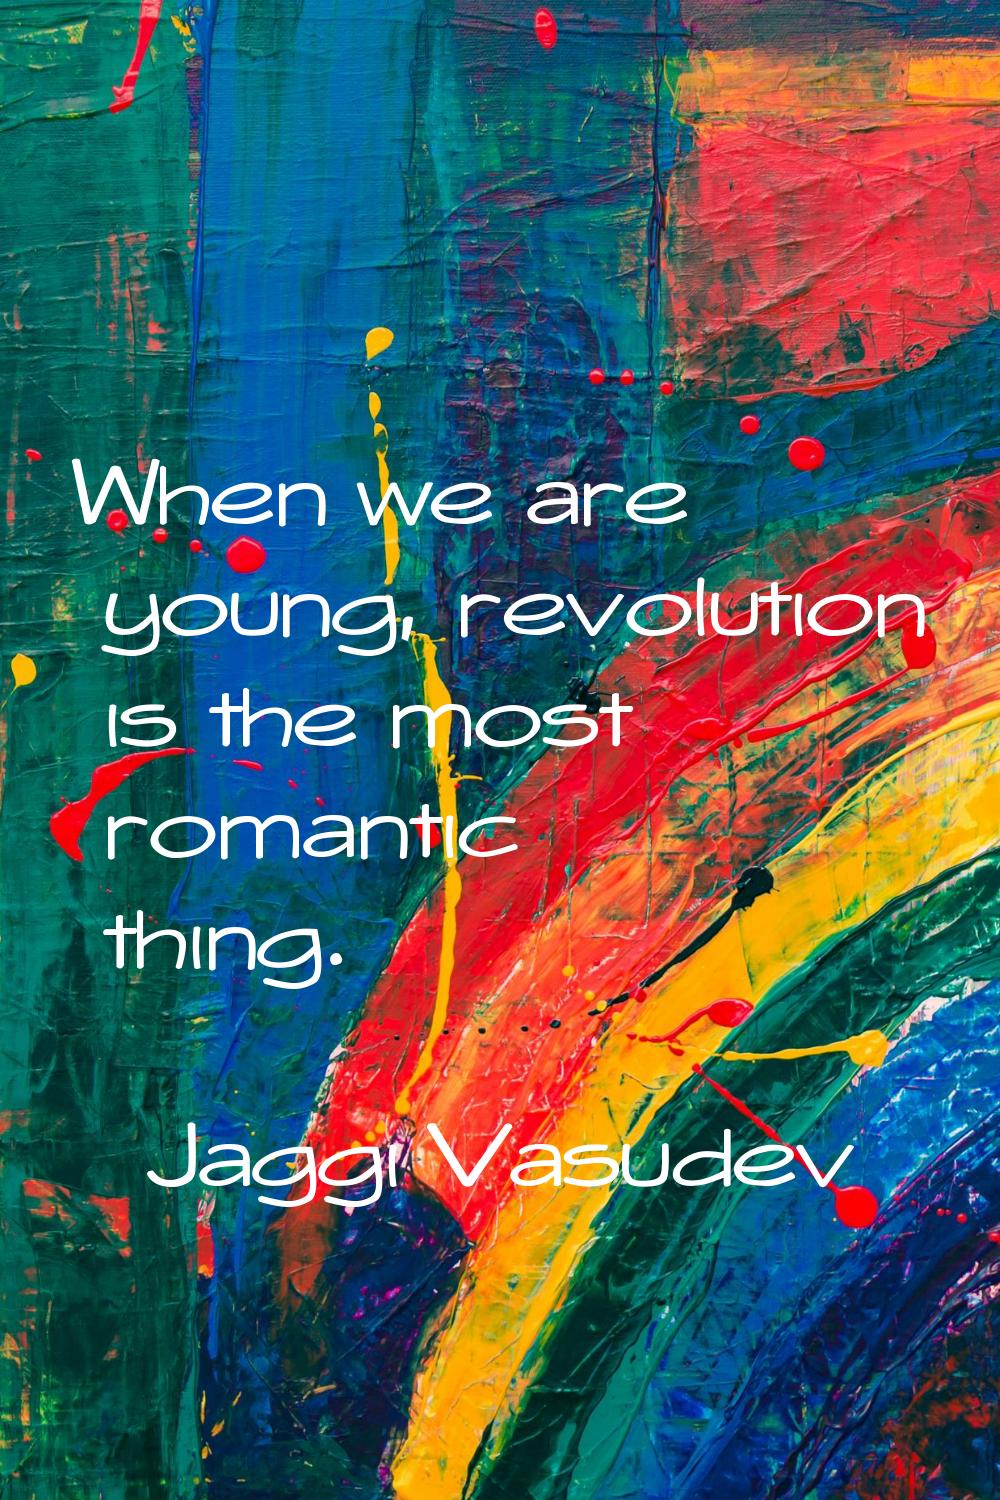 When we are young, revolution is the most romantic thing.